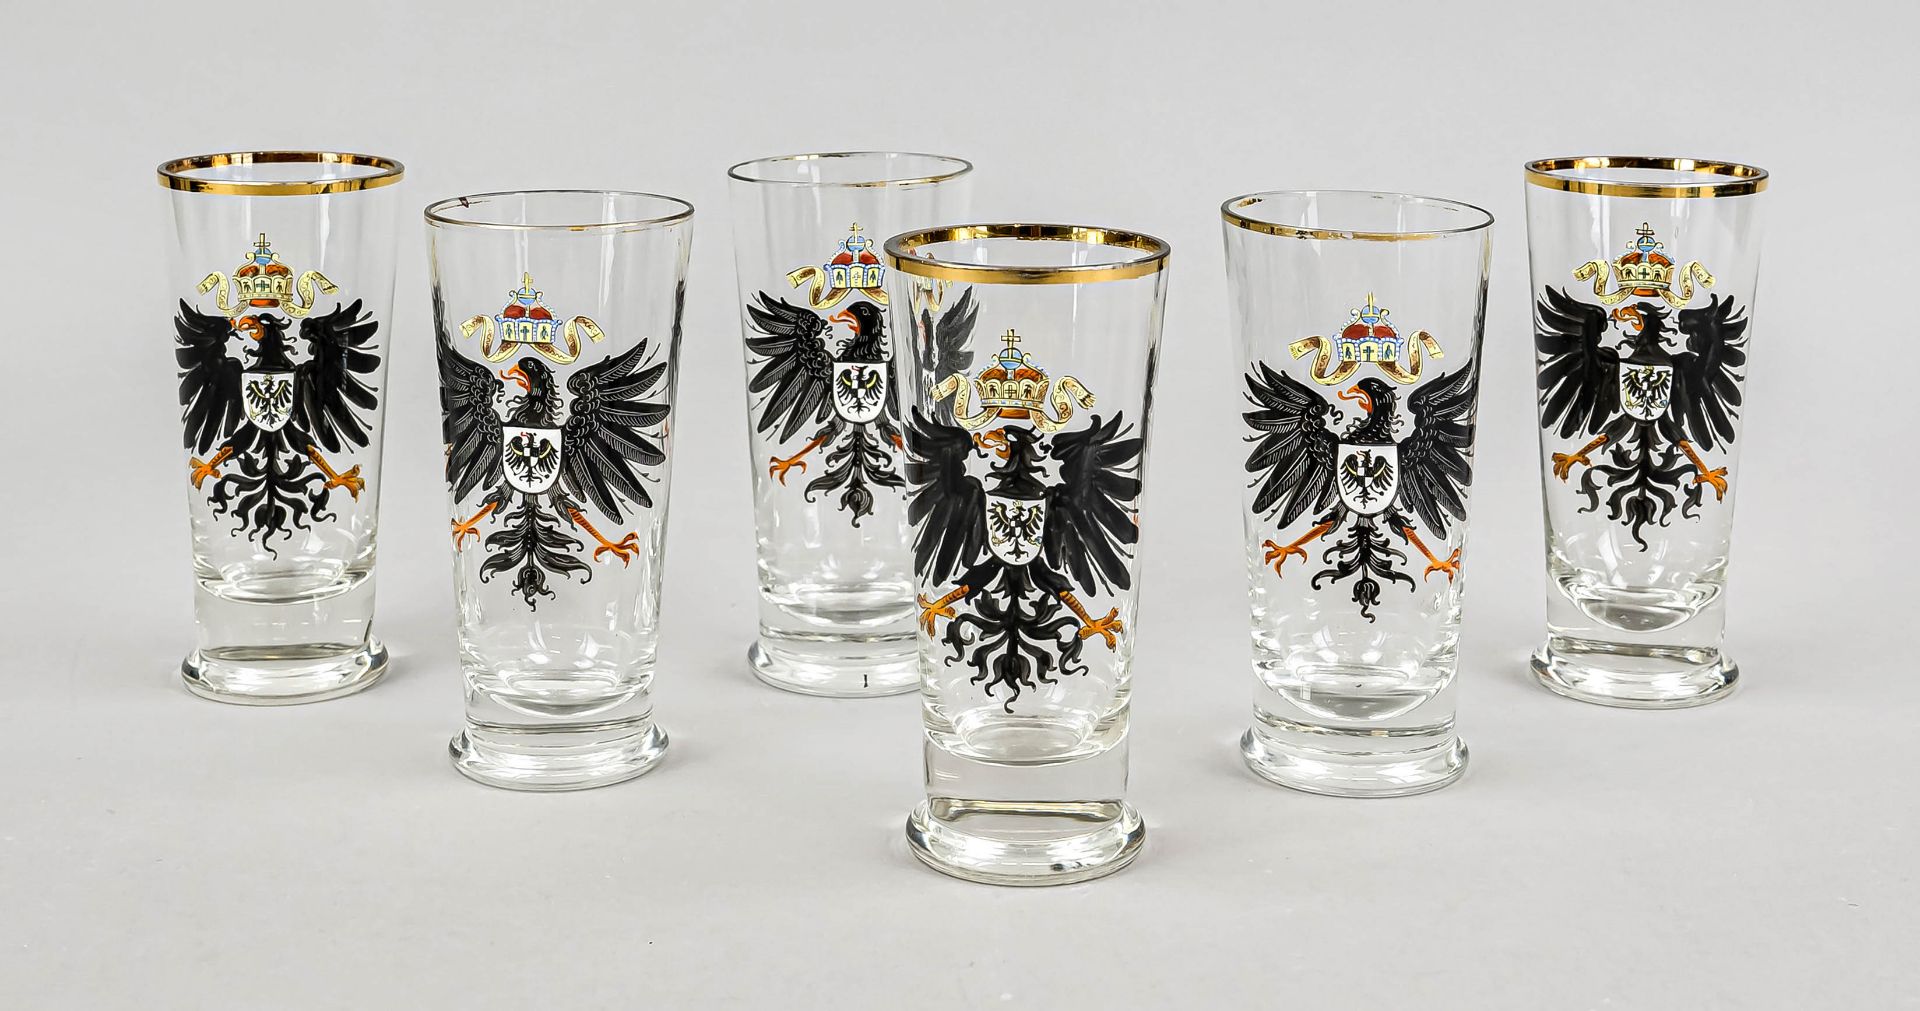 Six beakers, early 20th century, round base, conical body, clear glass with polychrome heraldic cold